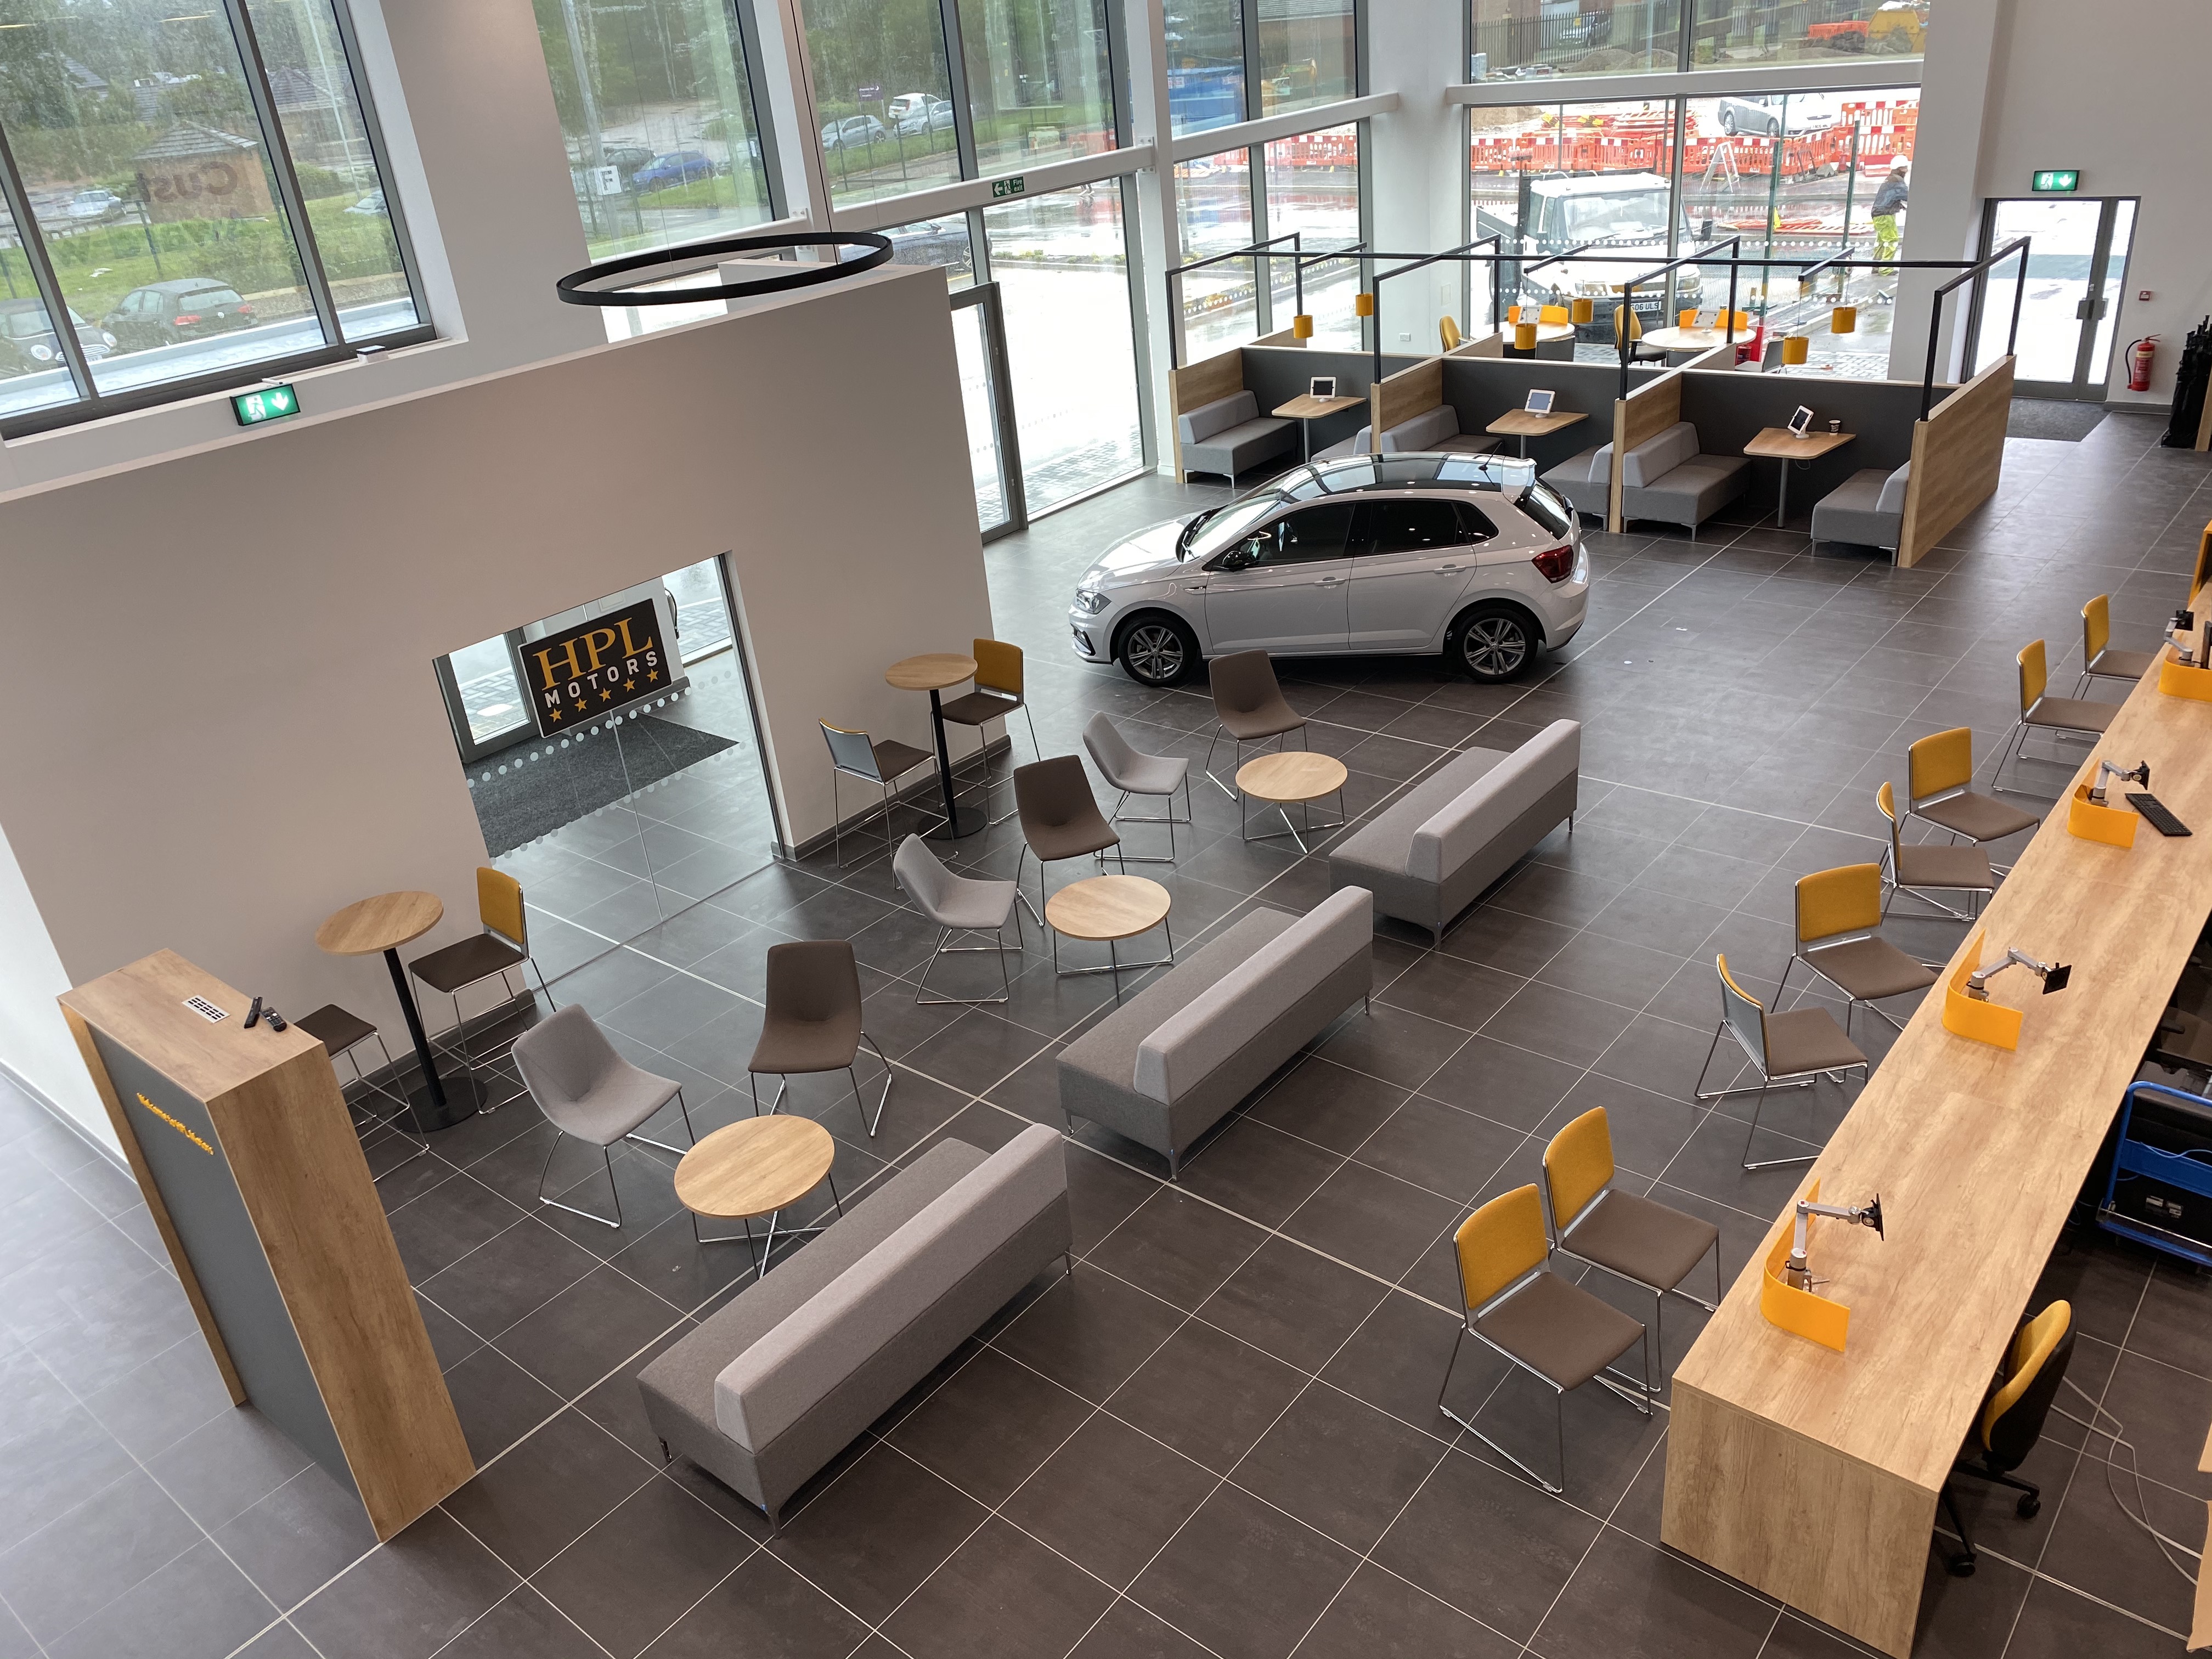 Interior of a HPL Motors Car Showroom with a Car and seating areas surrounding it